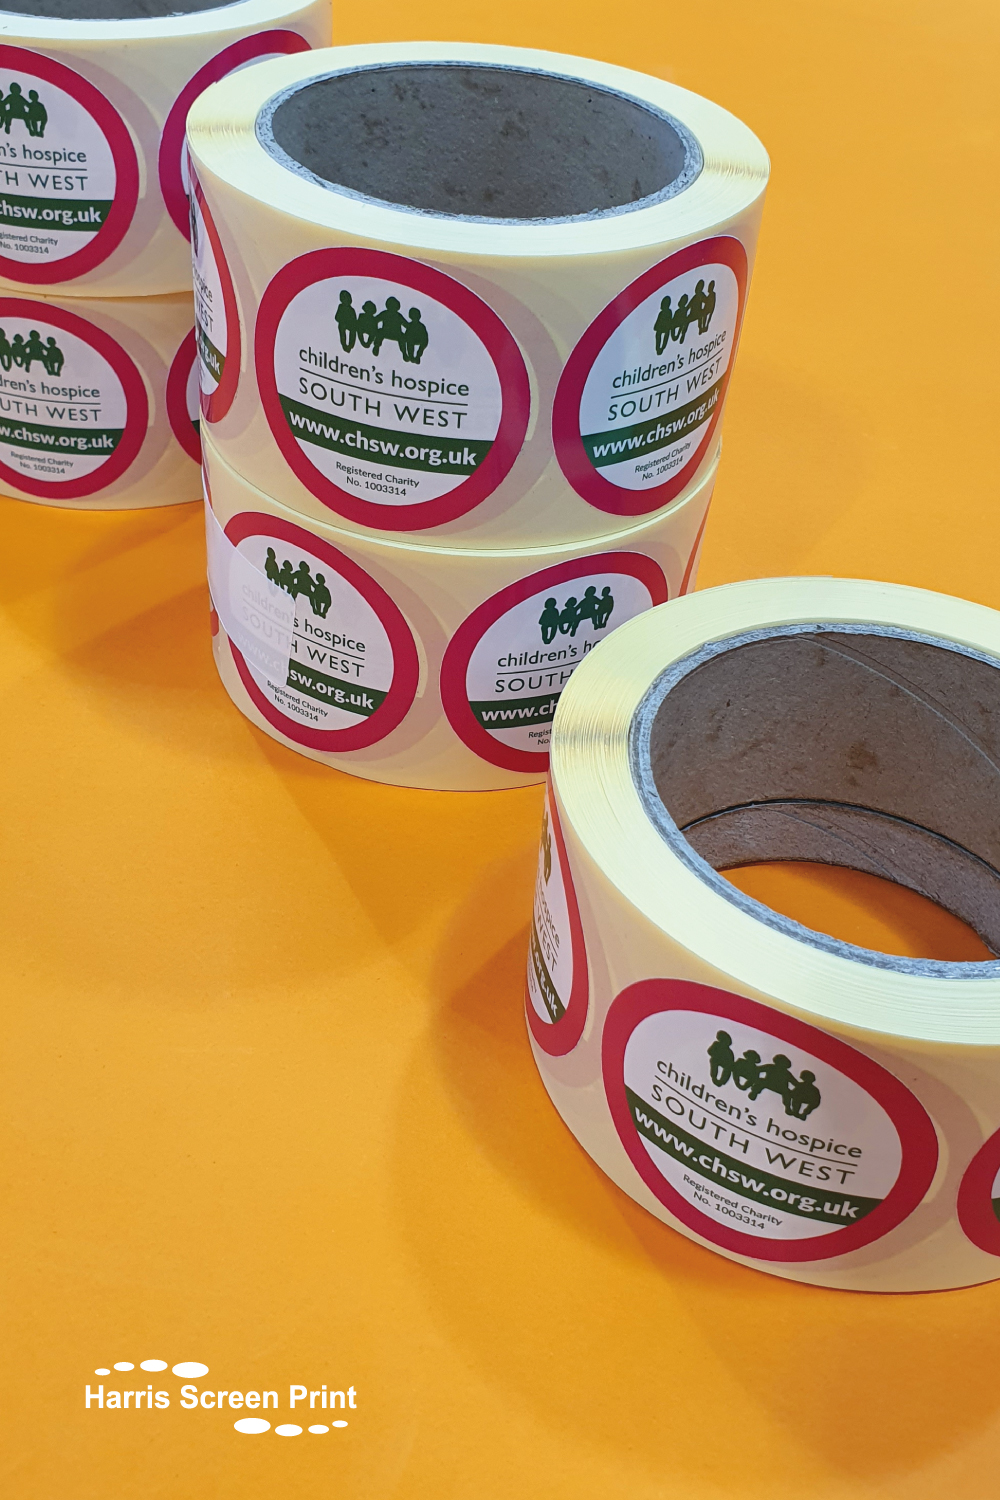 Rolls of Charity Stickers printed for UK Children's Hospice